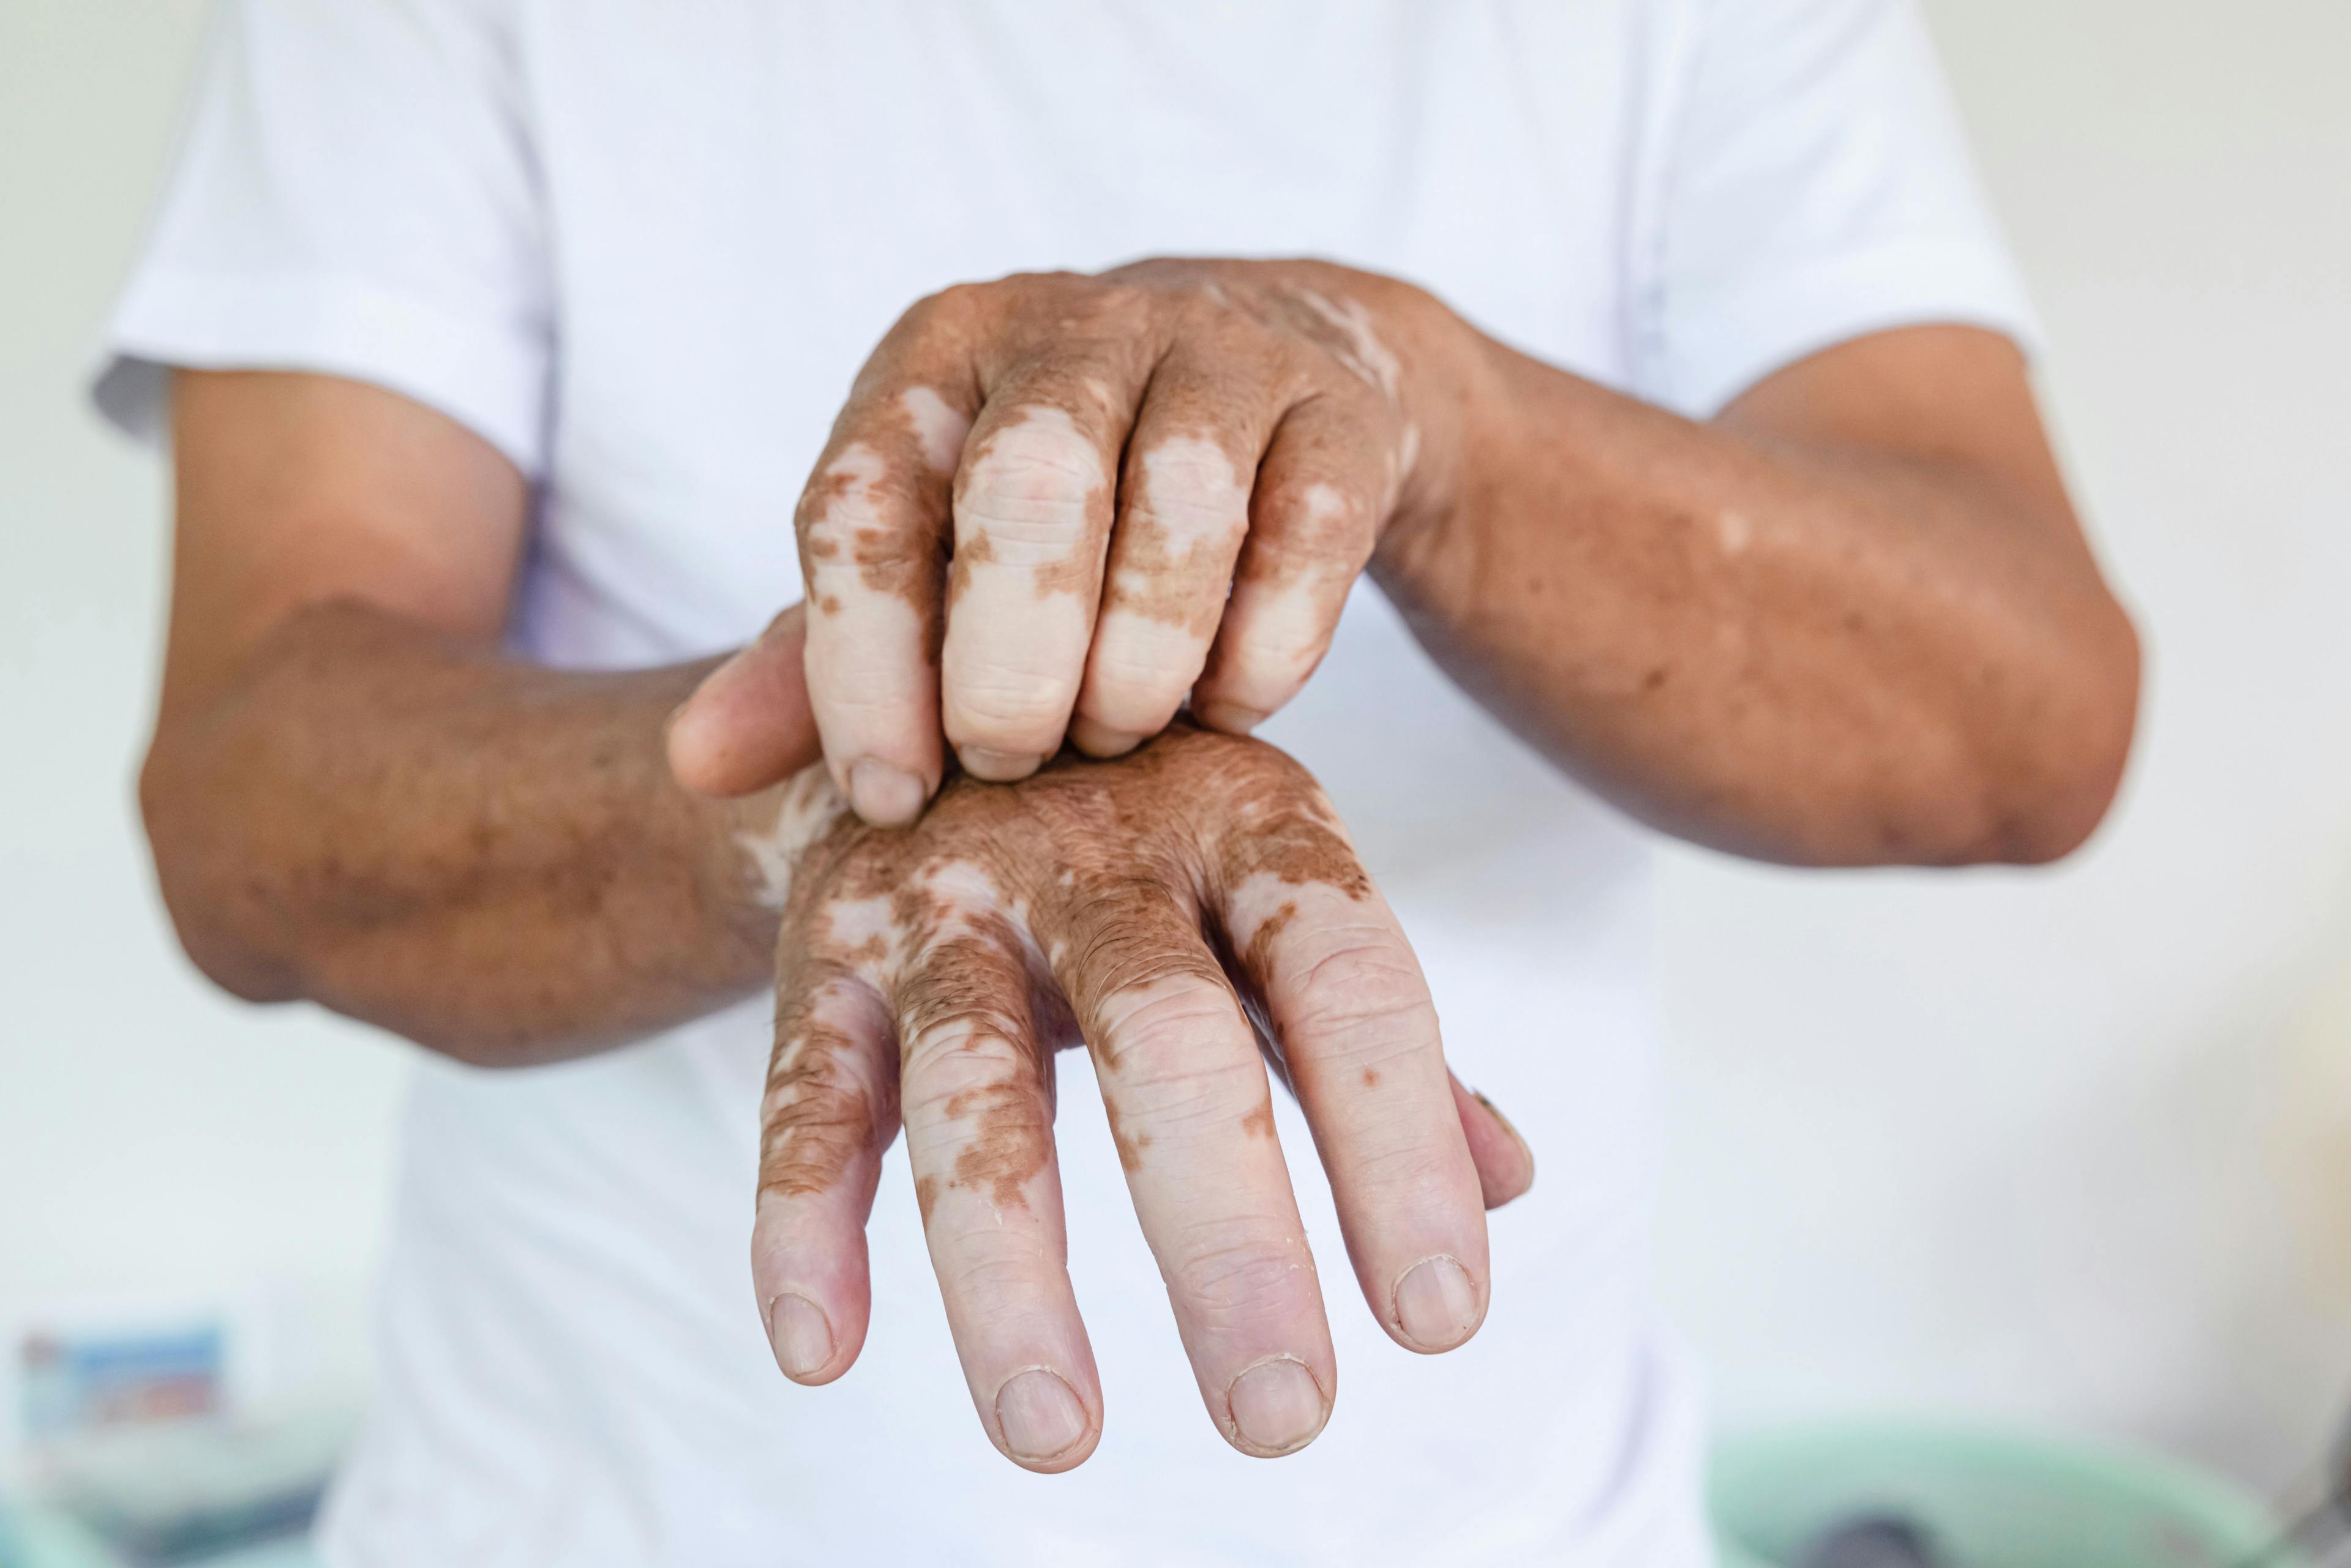 Combined With NB-UVB Therapy, Topical Vitamin D May Enhance Therapeutic Outcomes of Vitiligo